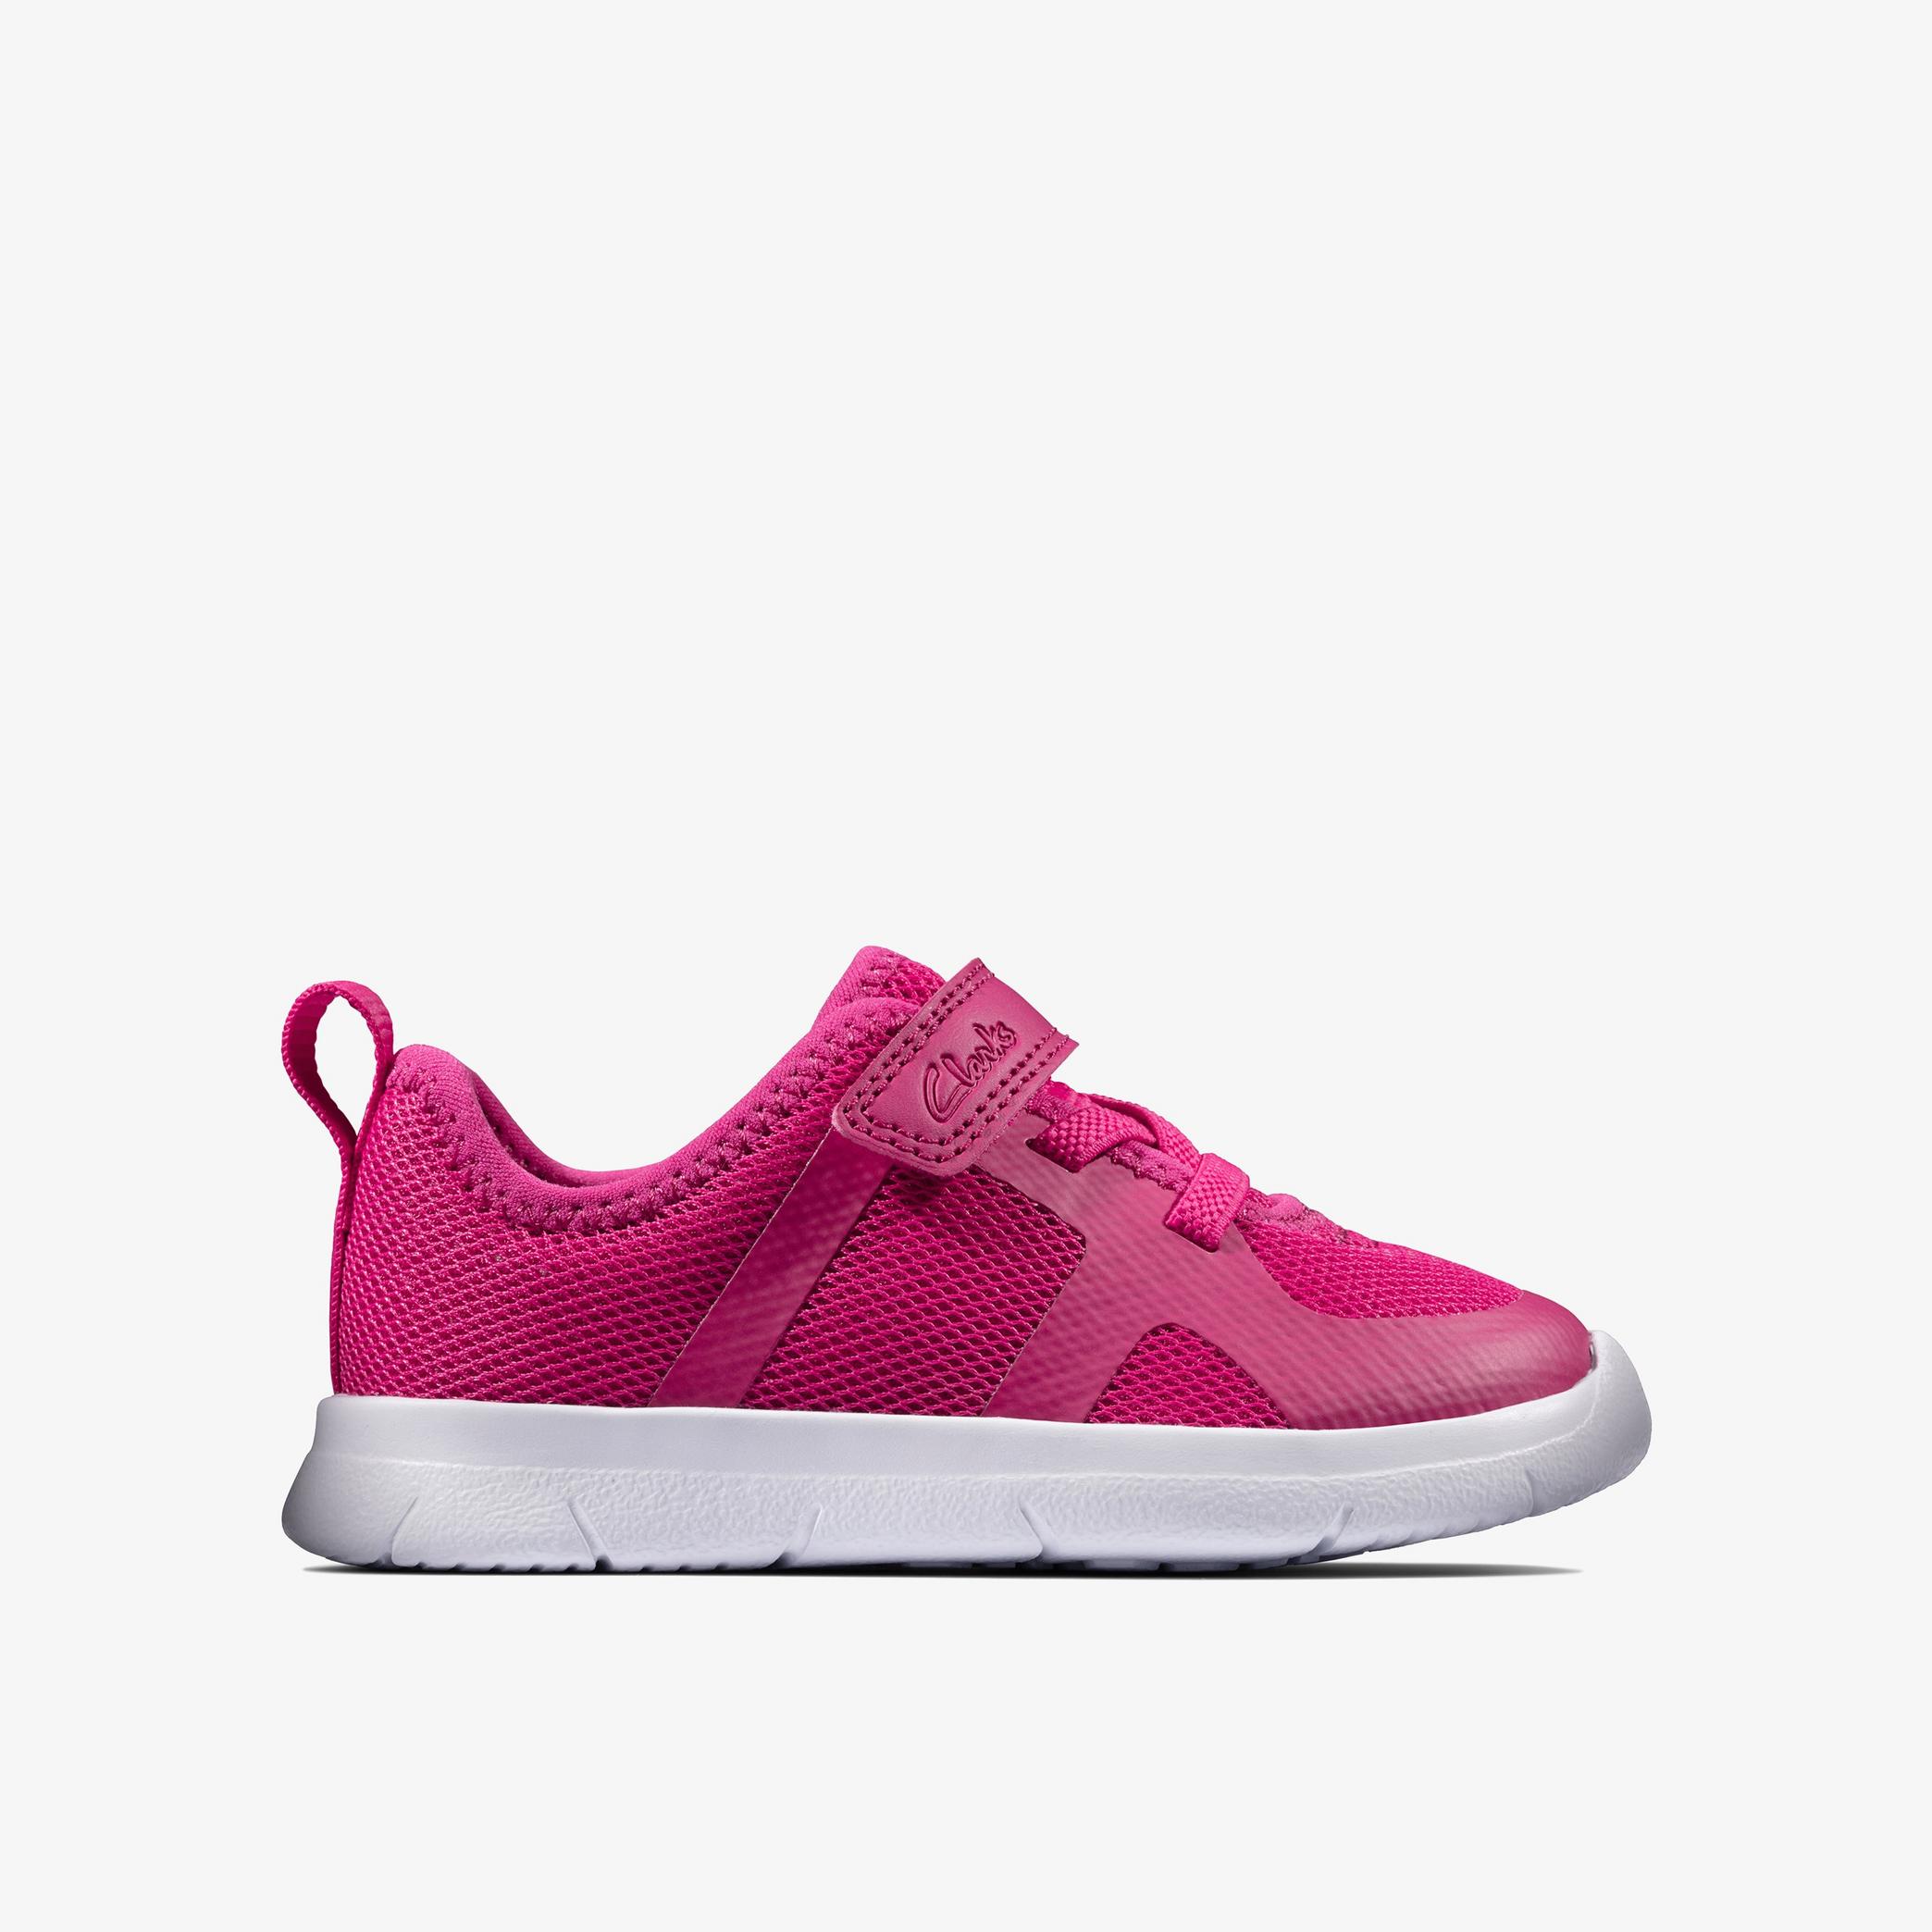 Ath Flux Toddler Raspberry Trainers, view 1 of 6